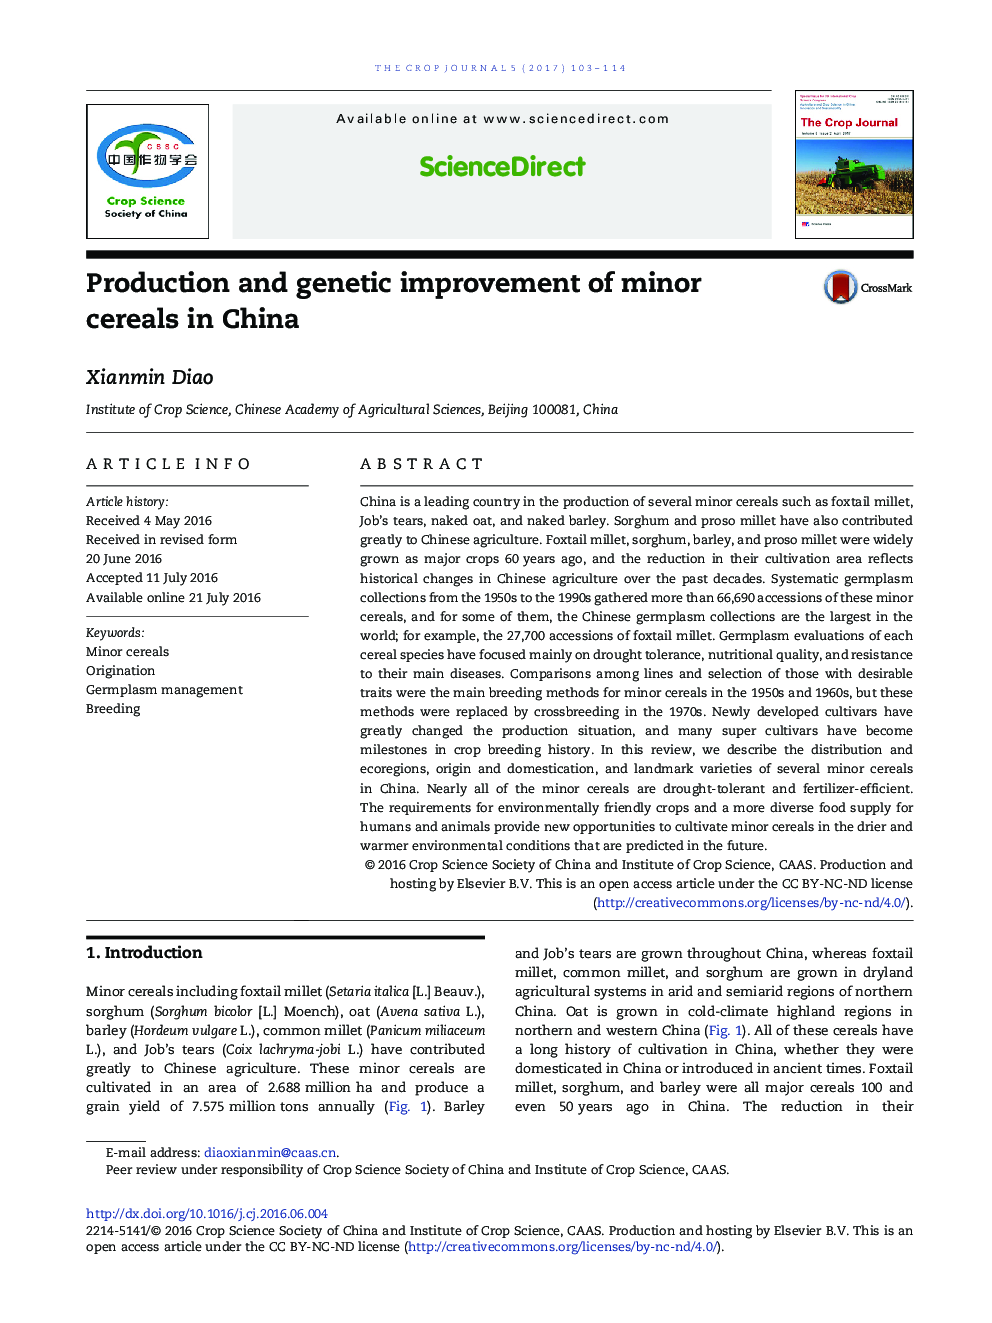 Production and genetic improvement of minor cereals in China